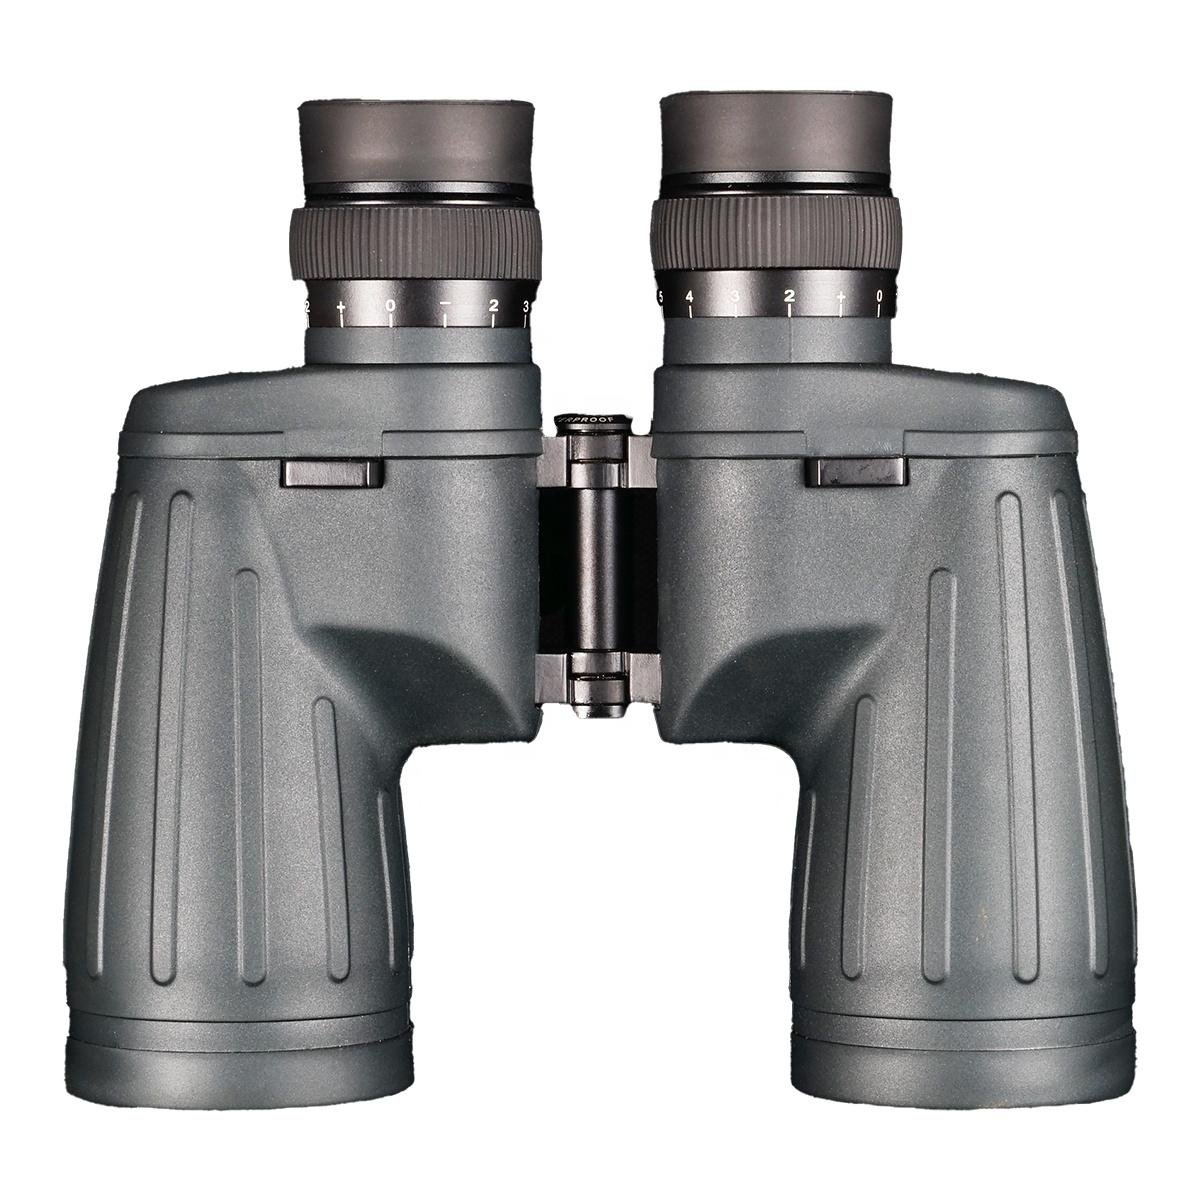 Military 7x50mm Binocular with reticle and compass Marine 2